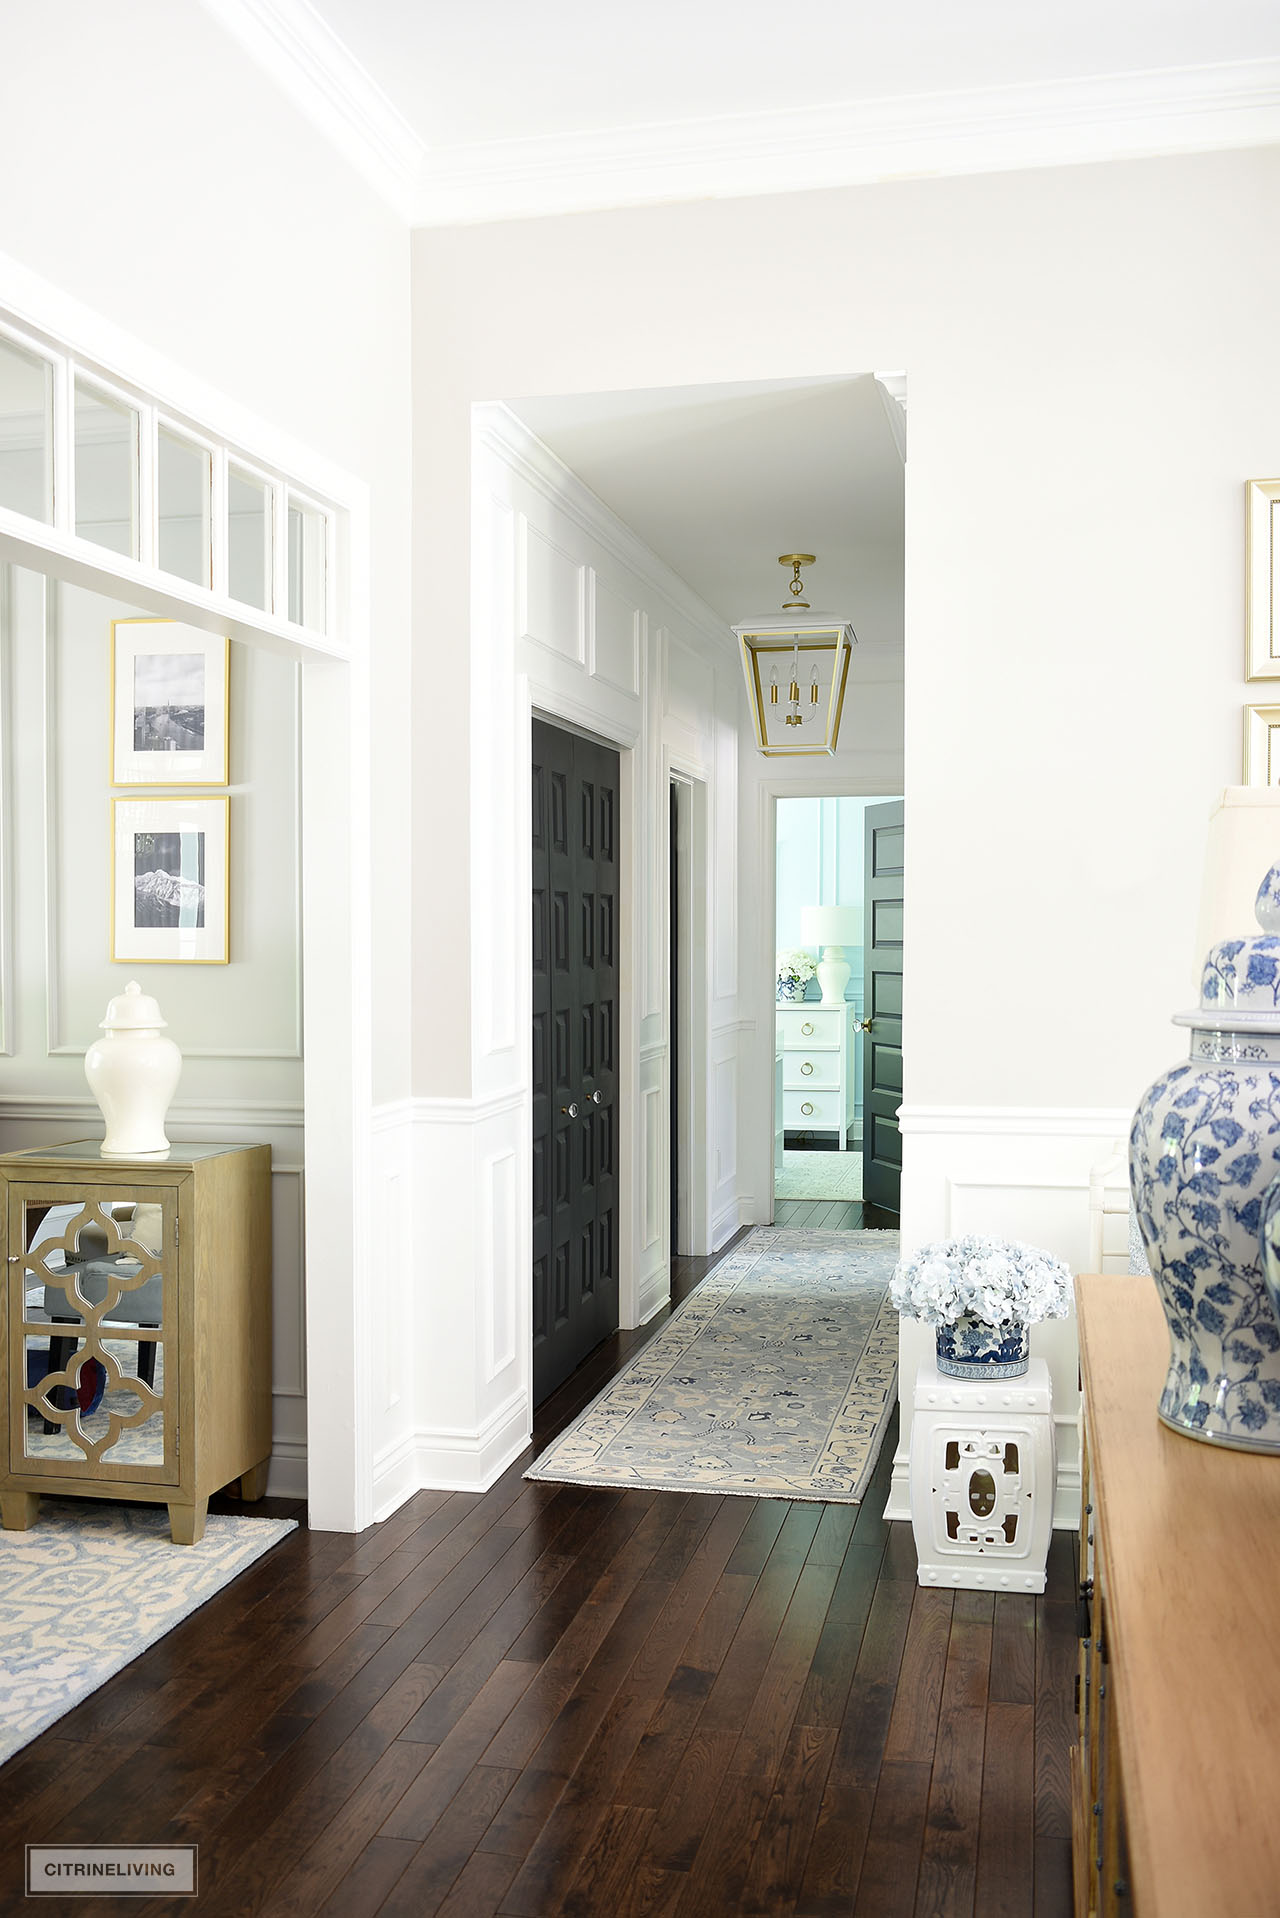 Open concept home with a view down a white painted hallway with moldings, large white and gold pendant light, and light blue oushak rug